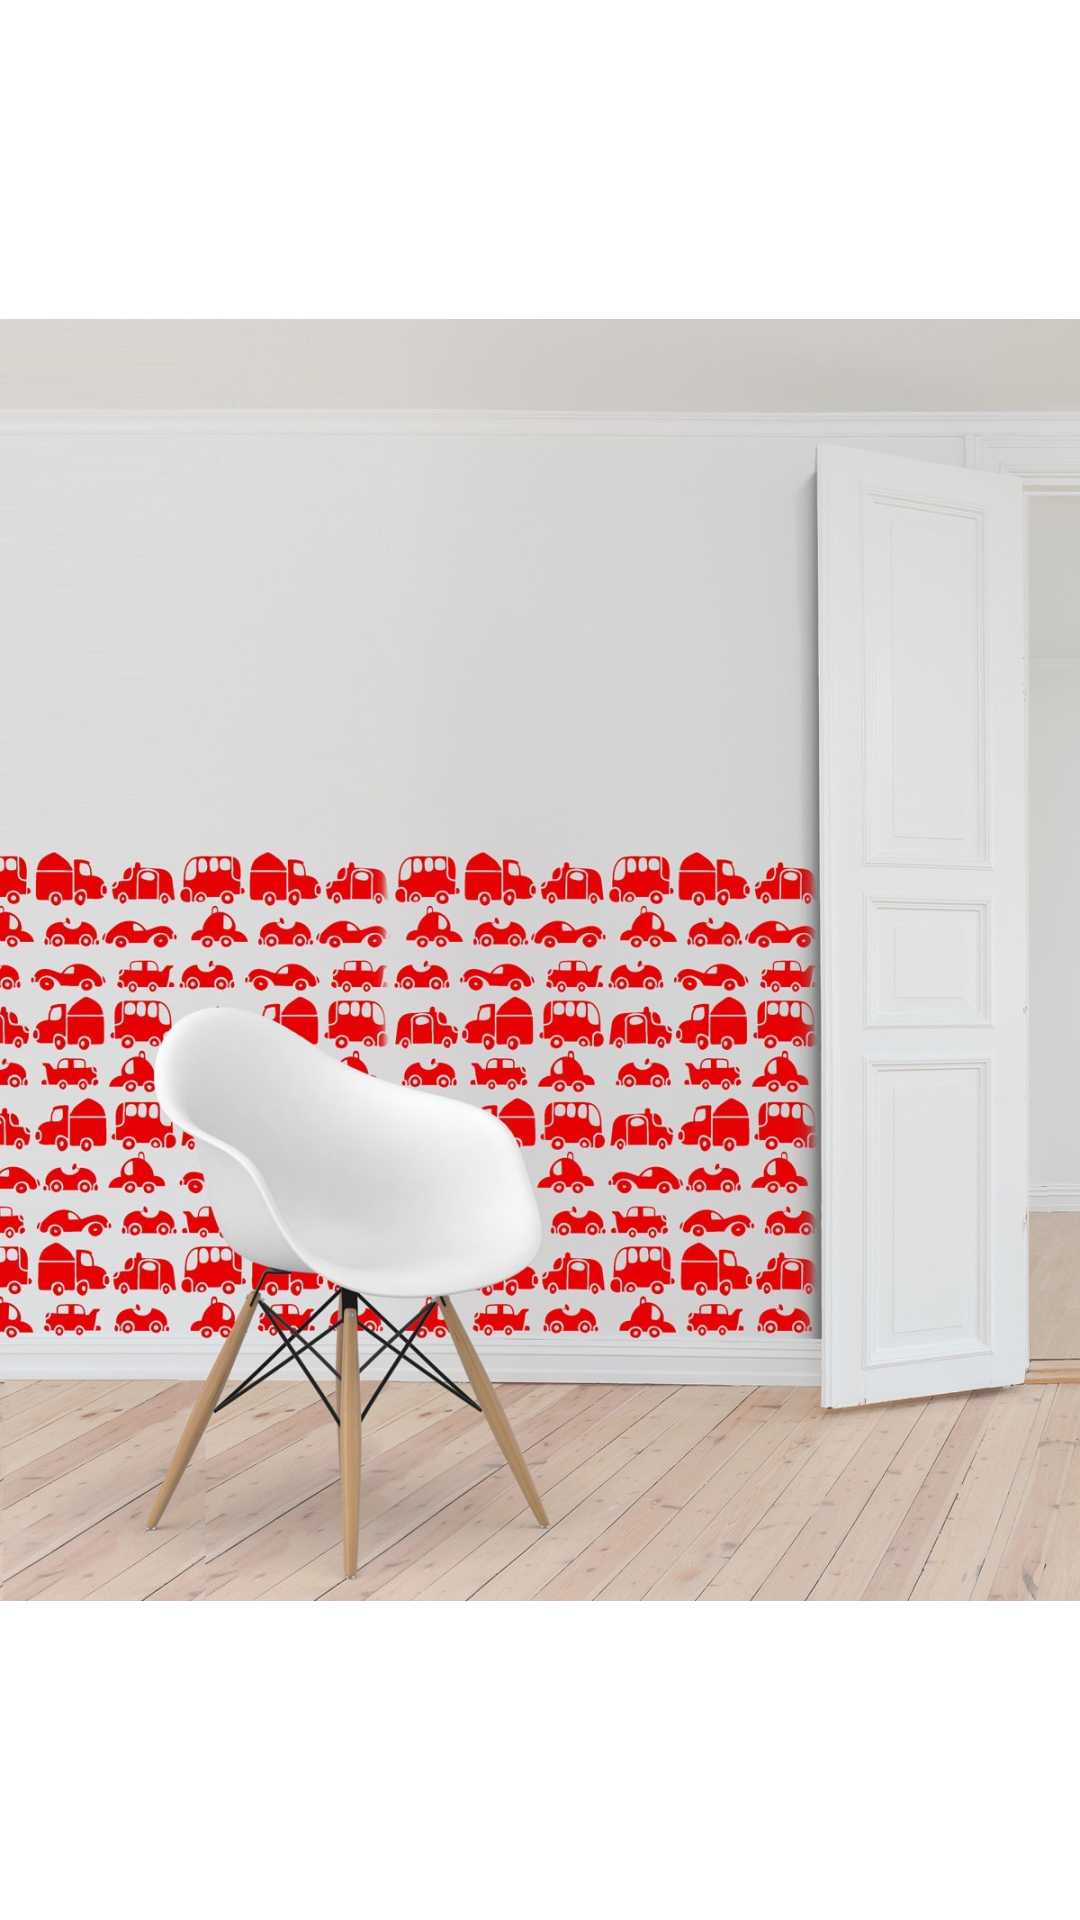 Wallpaper Cars stickers